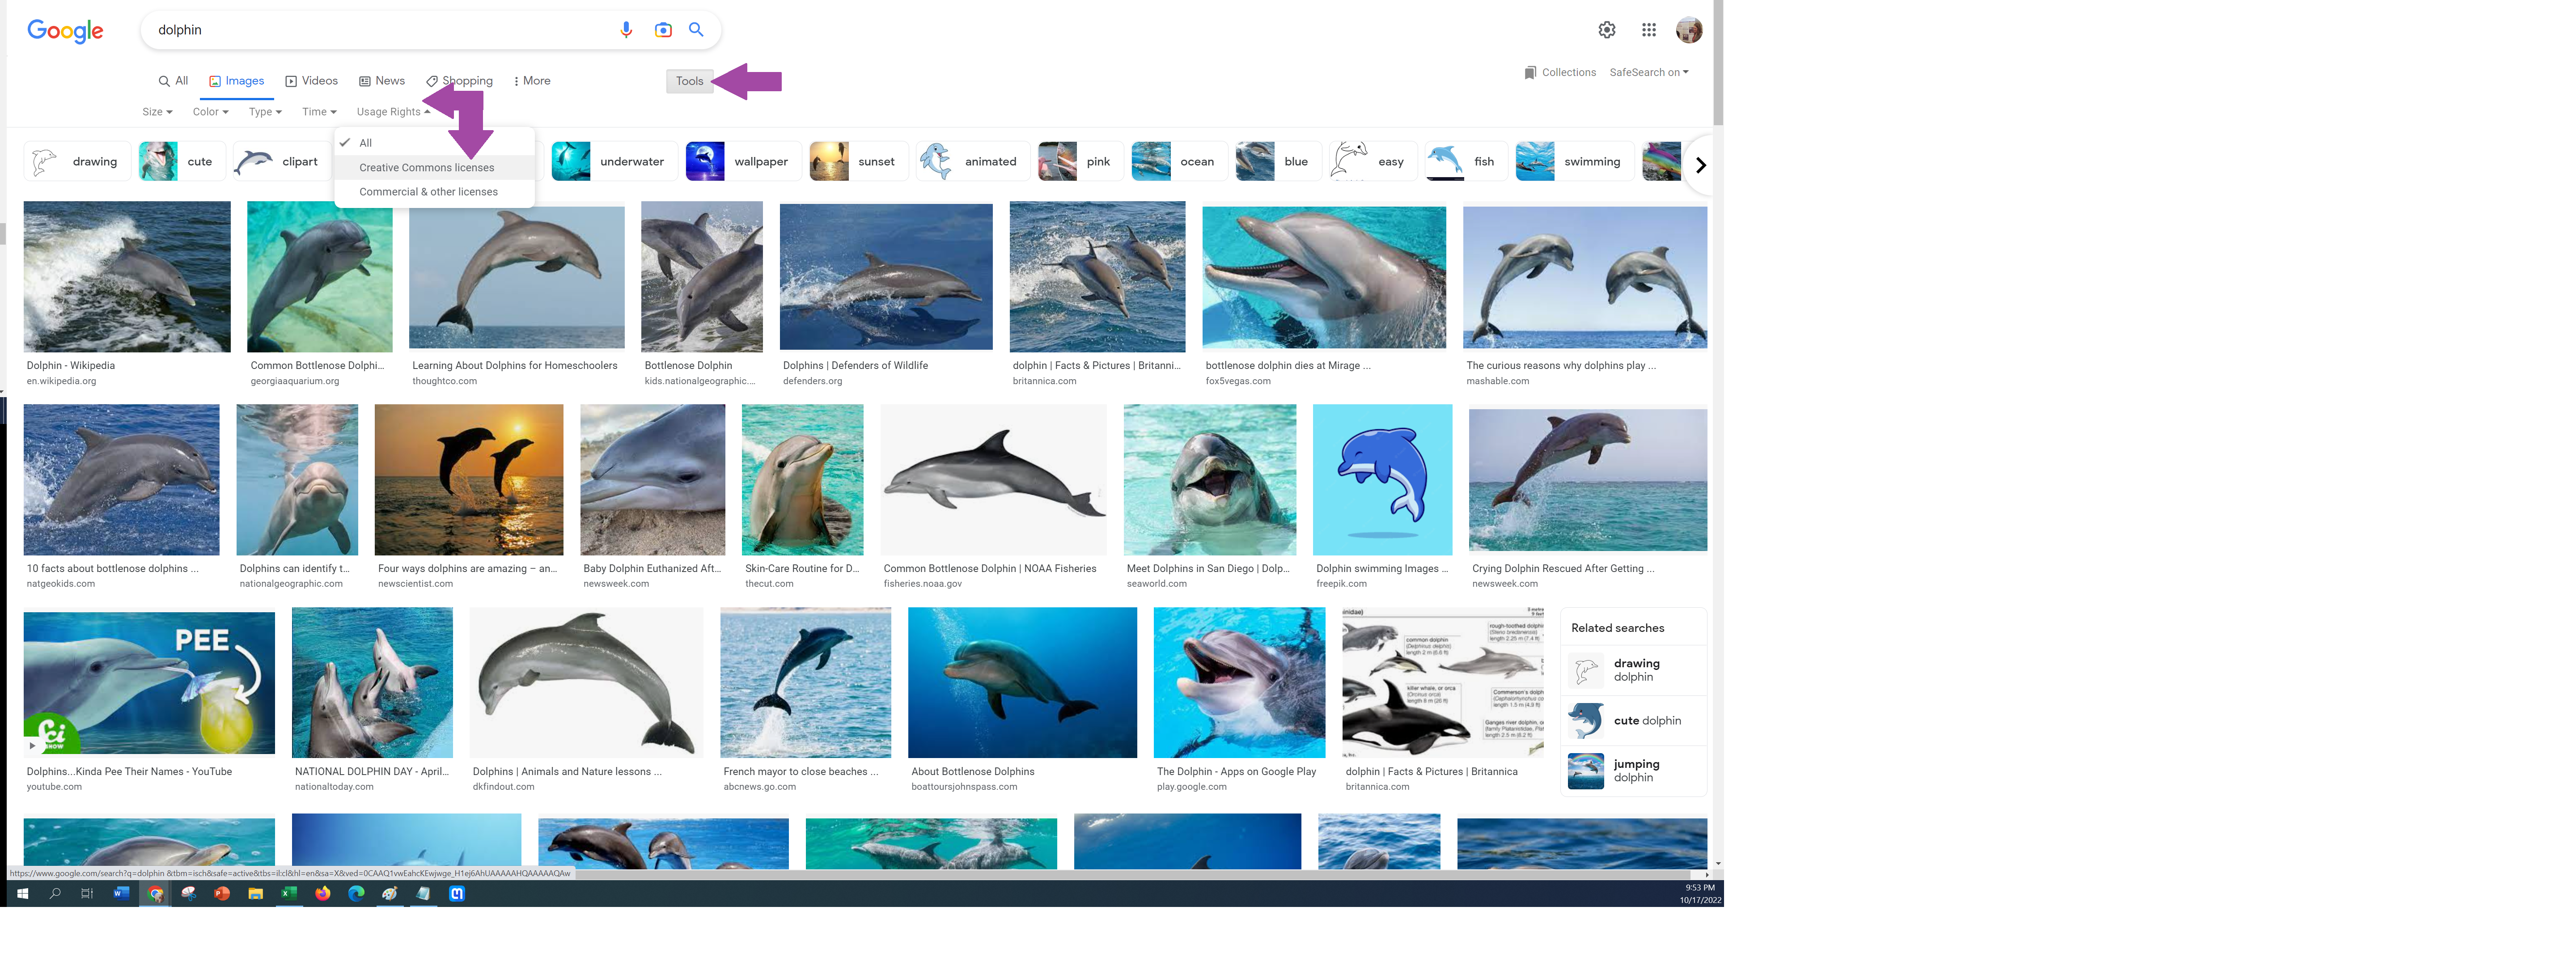 Screenshot of Google images after searching "dolphin". there is a dropdown box right beneath the search bar as a way to filter.